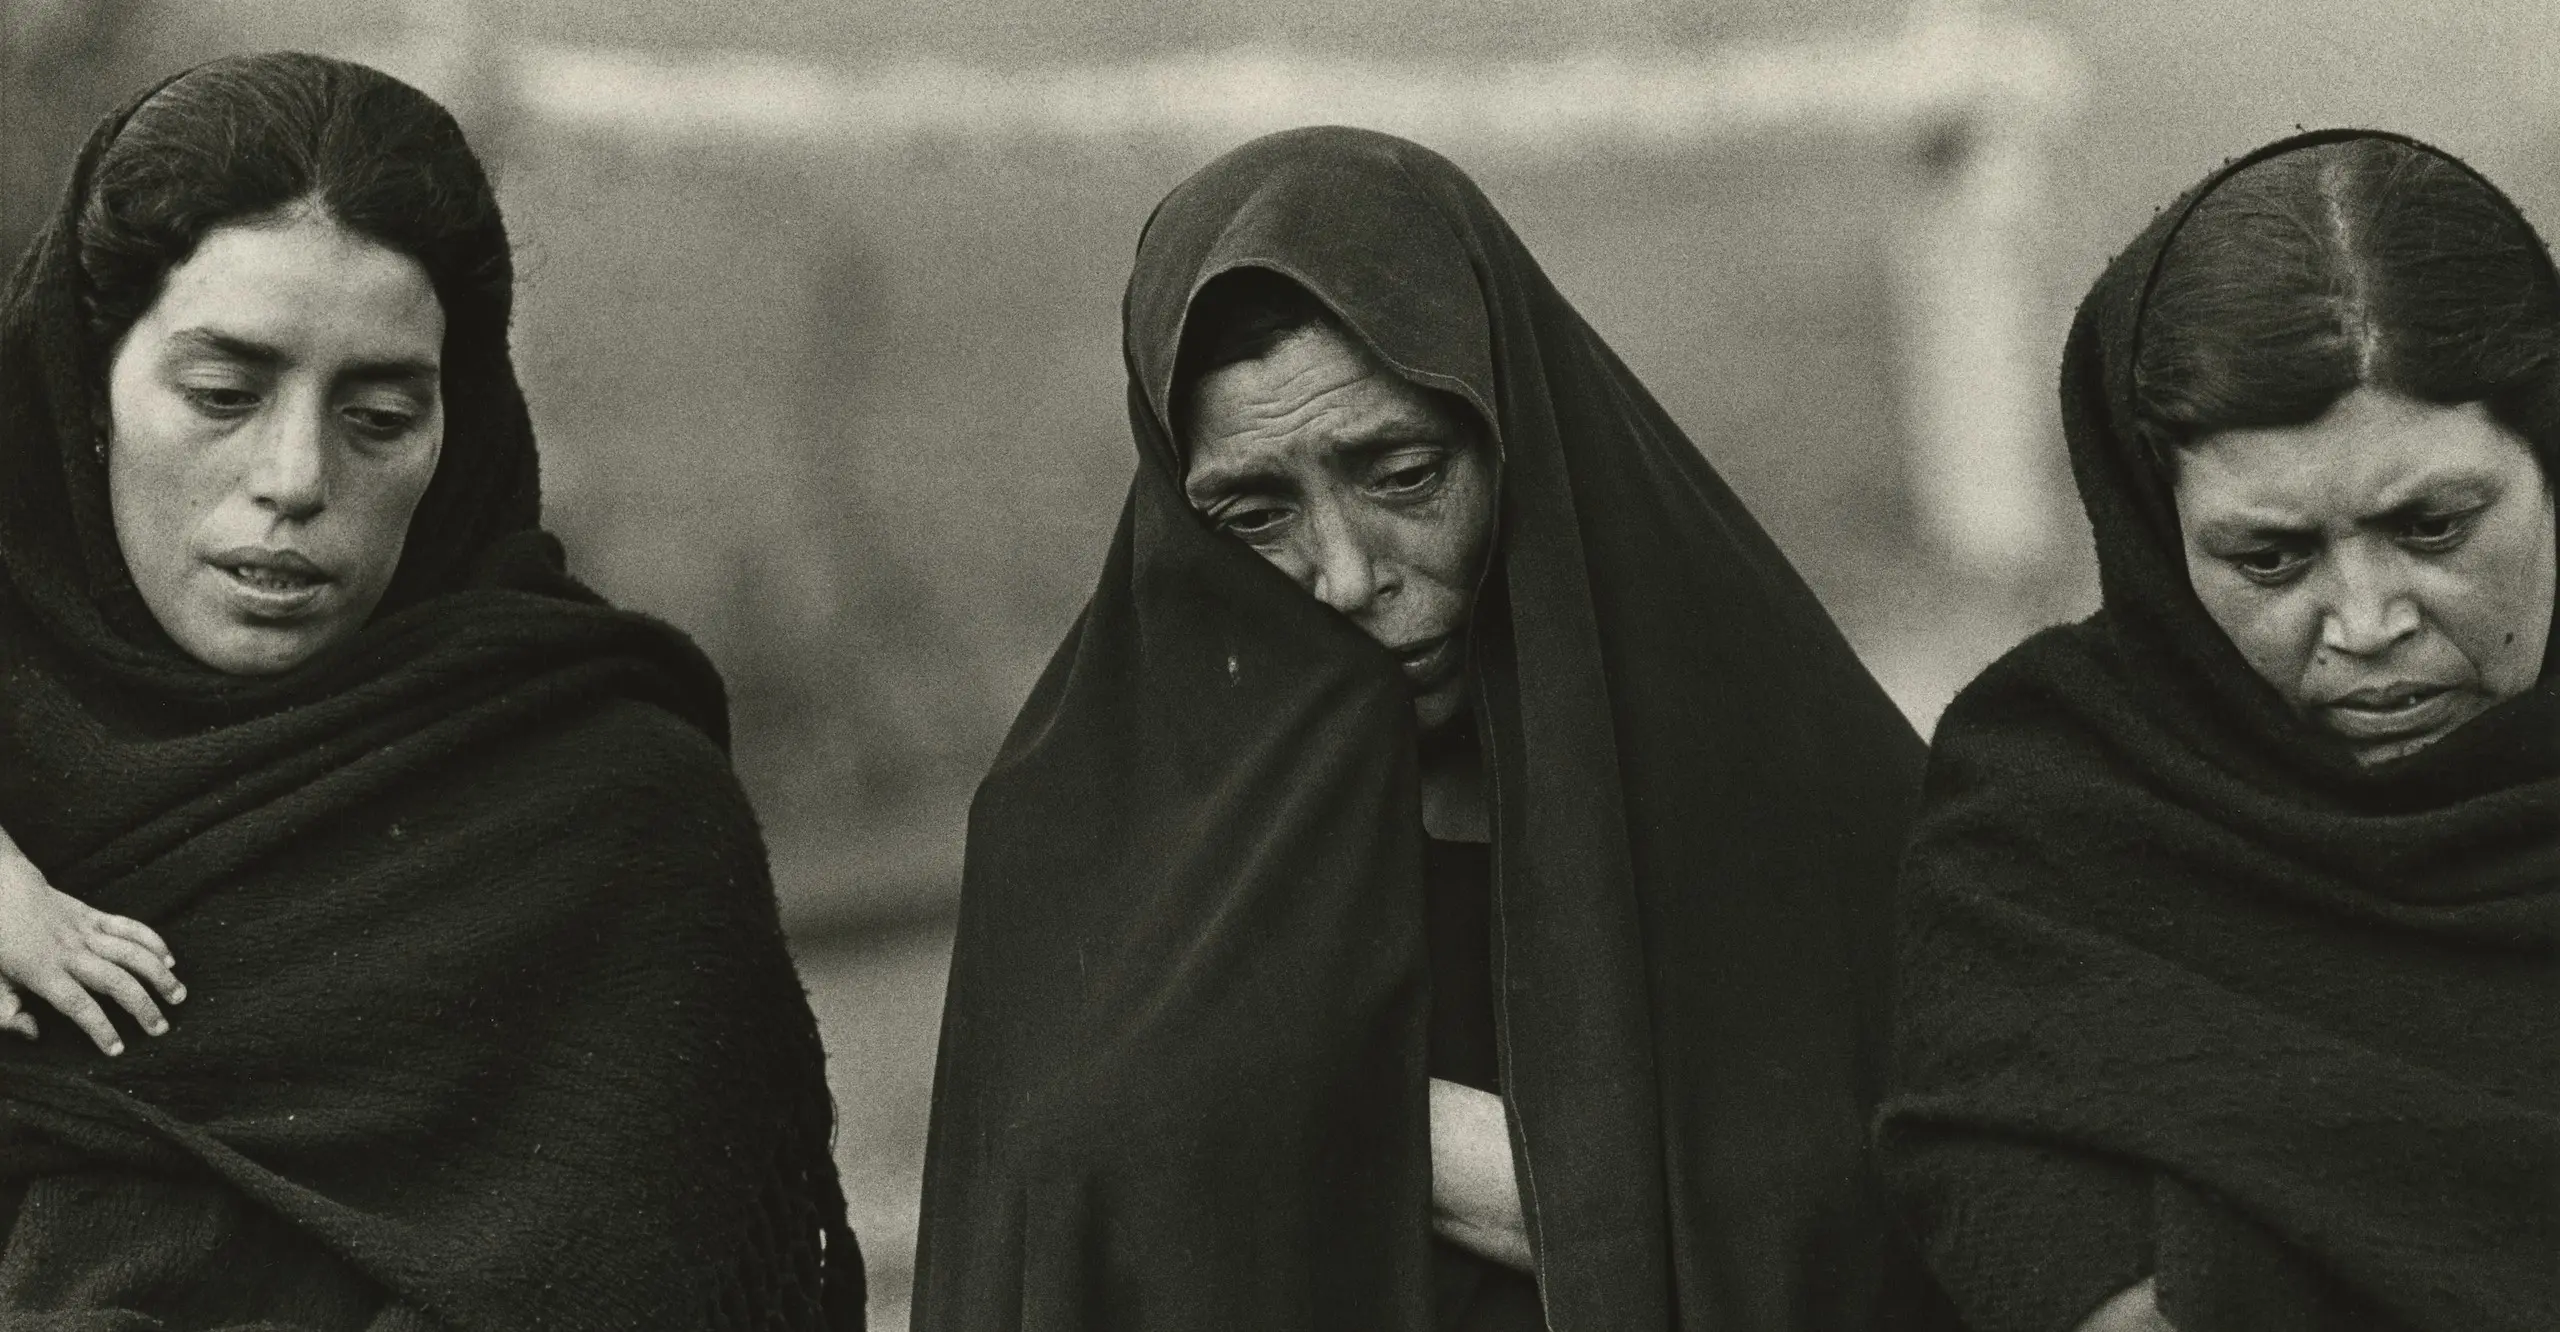 Black and white photograph of three women with black headscarves wrapped around them